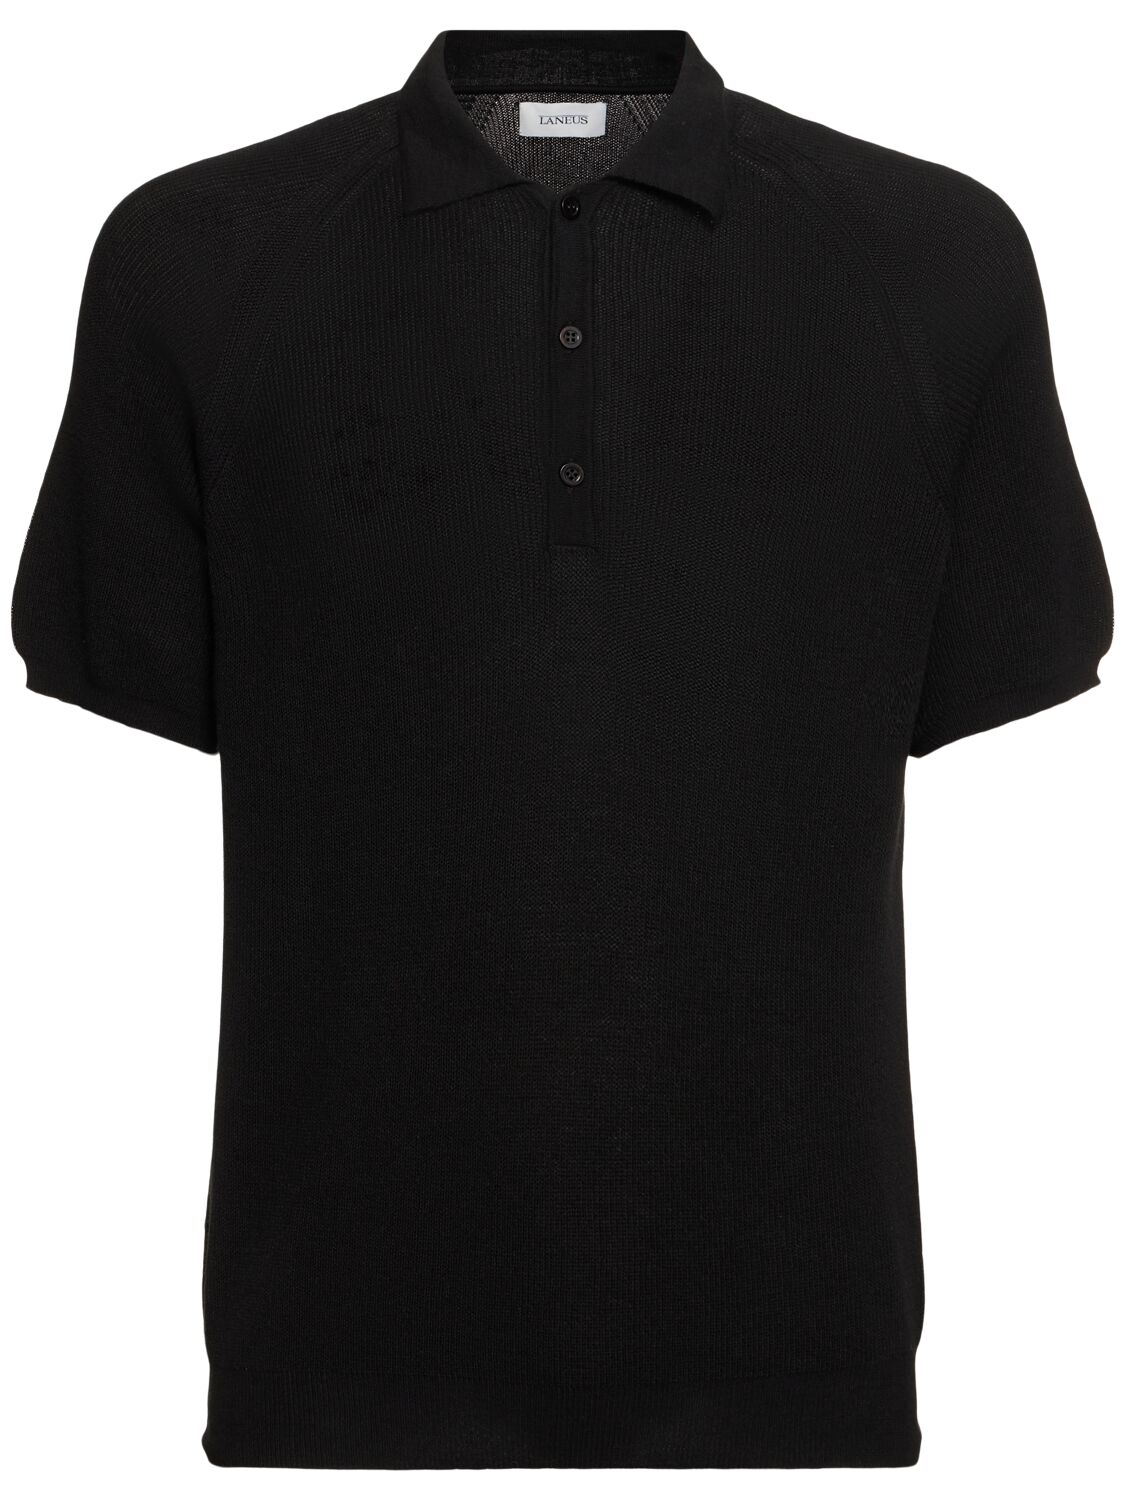 Image of Cotton Knit S/s Polo